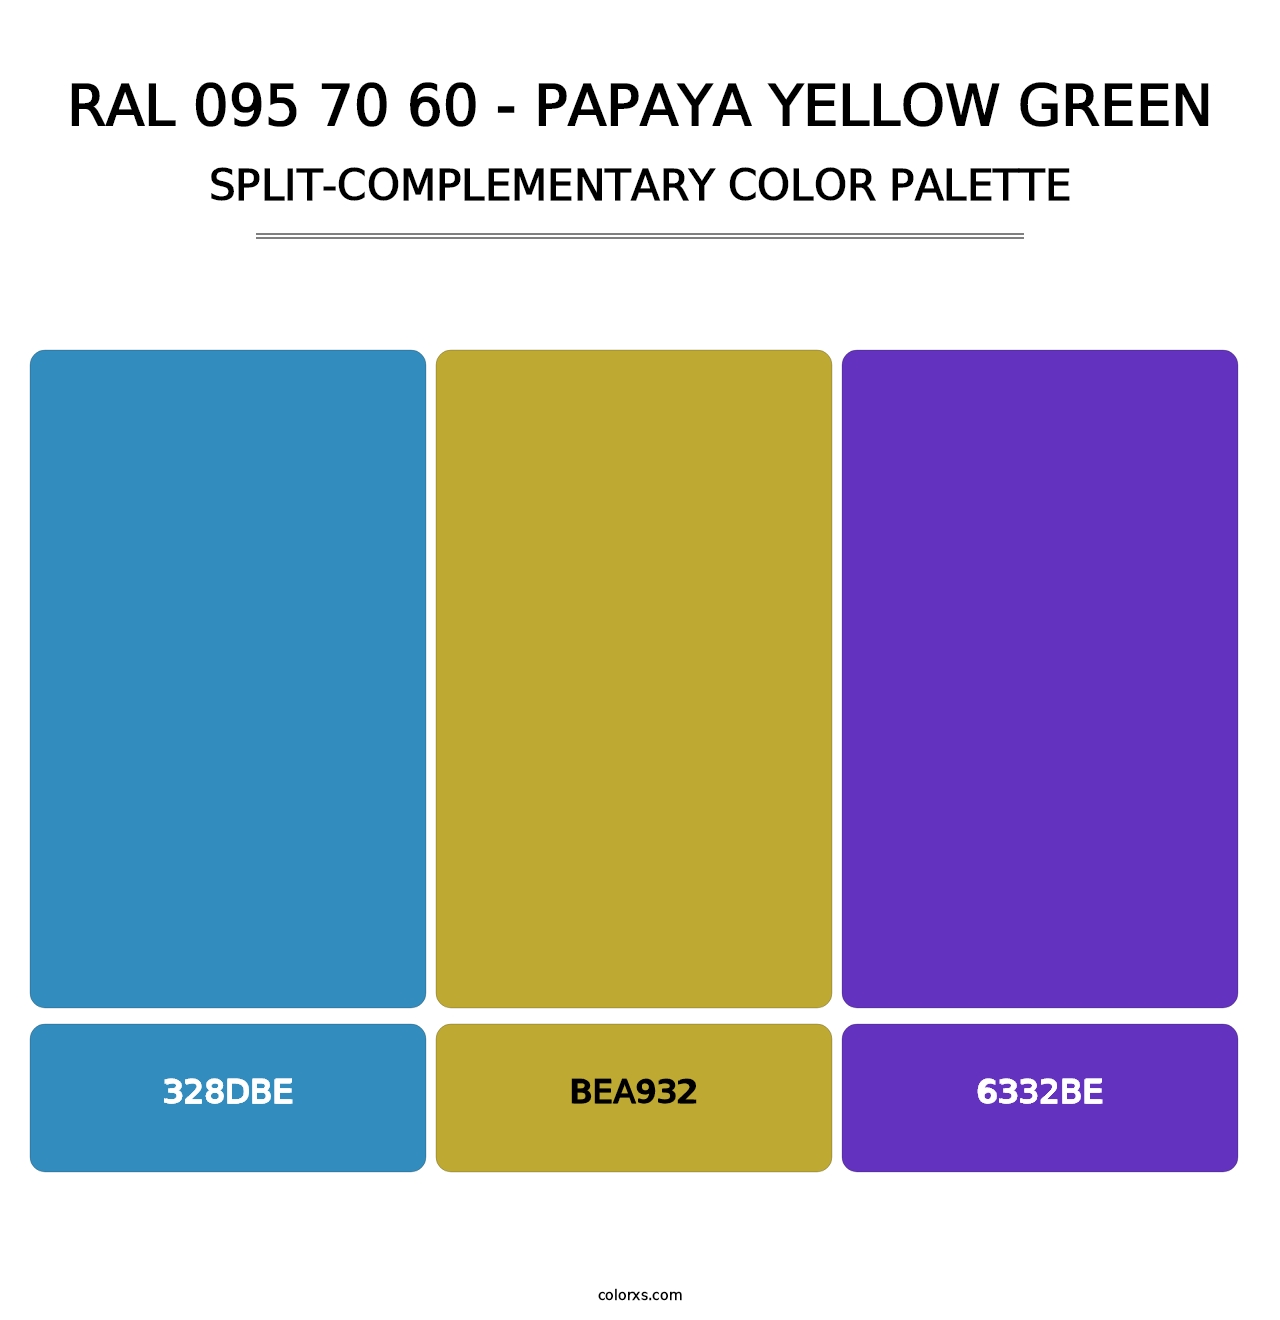 RAL 095 70 60 - Papaya Yellow Green - Split-Complementary Color Palette